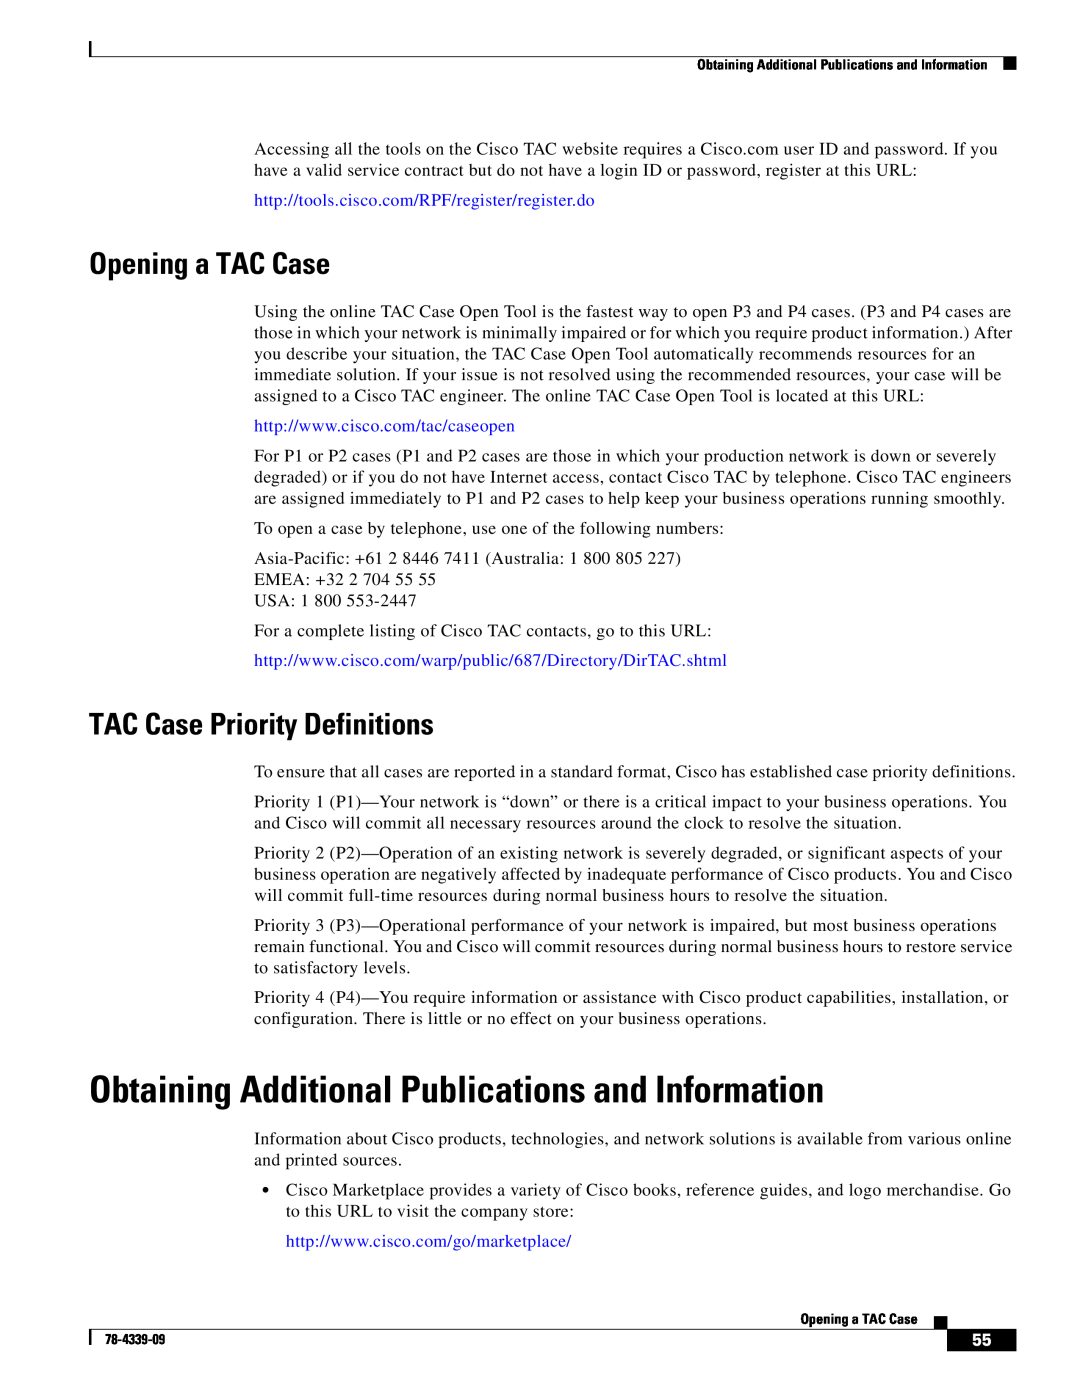 Cisco Systems GRP Obtaining Additional Publications and Information, Opening a TAC Case, TAC Case Priority Definitions 